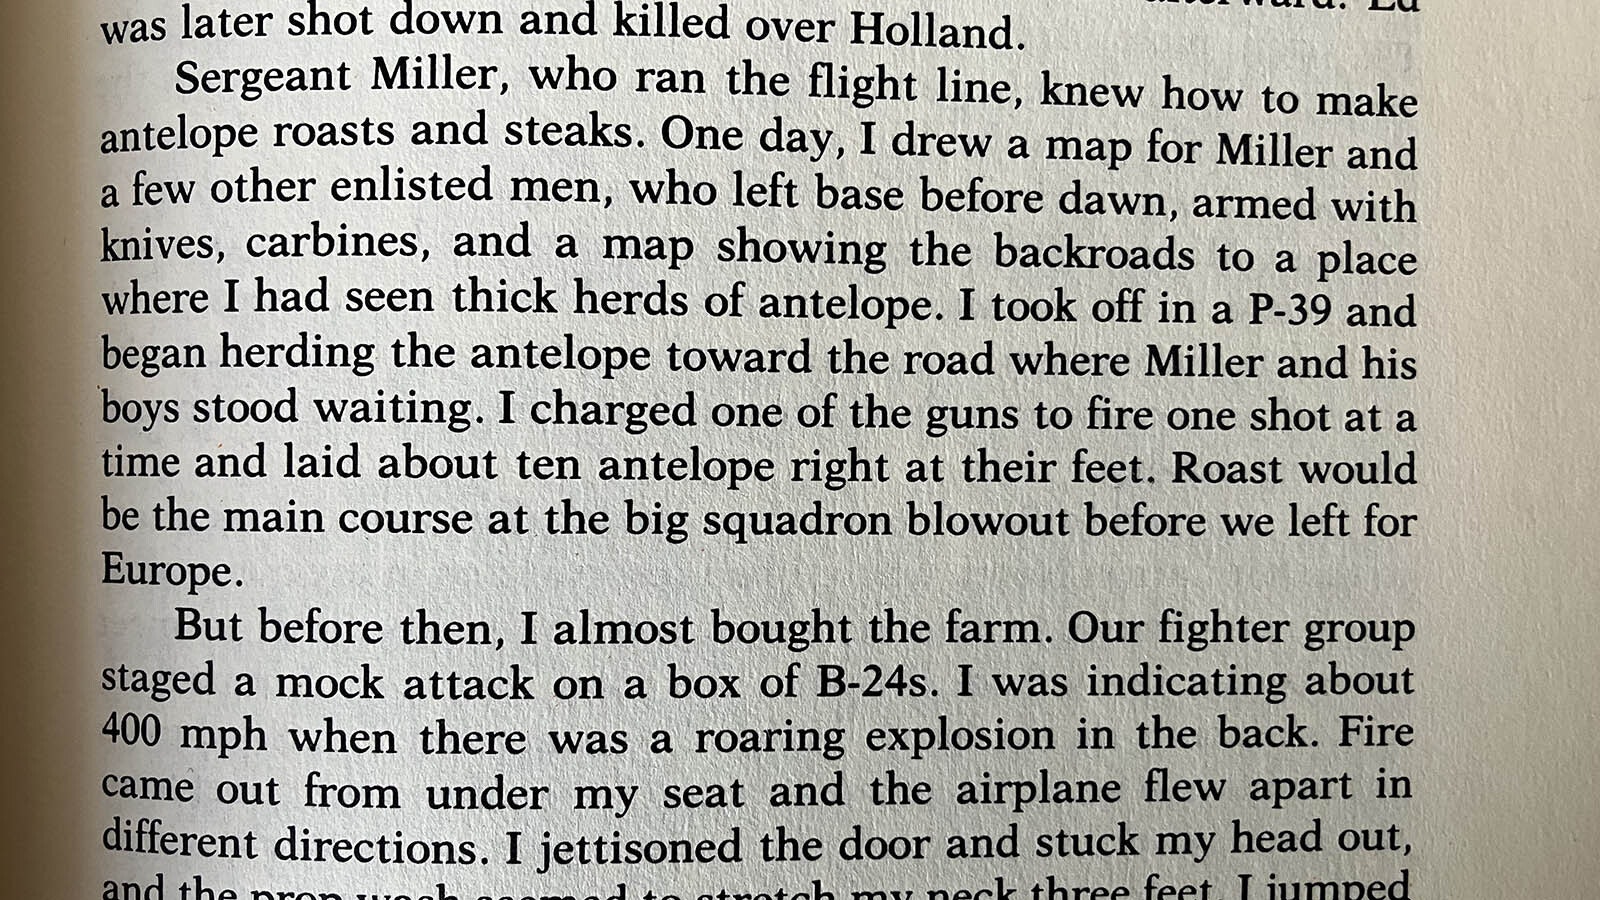 As part of his autobiography, “Yeager,” Chuck Yeager and his co-author Leo Janos describe the time the pilot took his P-39 up to herd antelope and dispatch them with a machine gun.